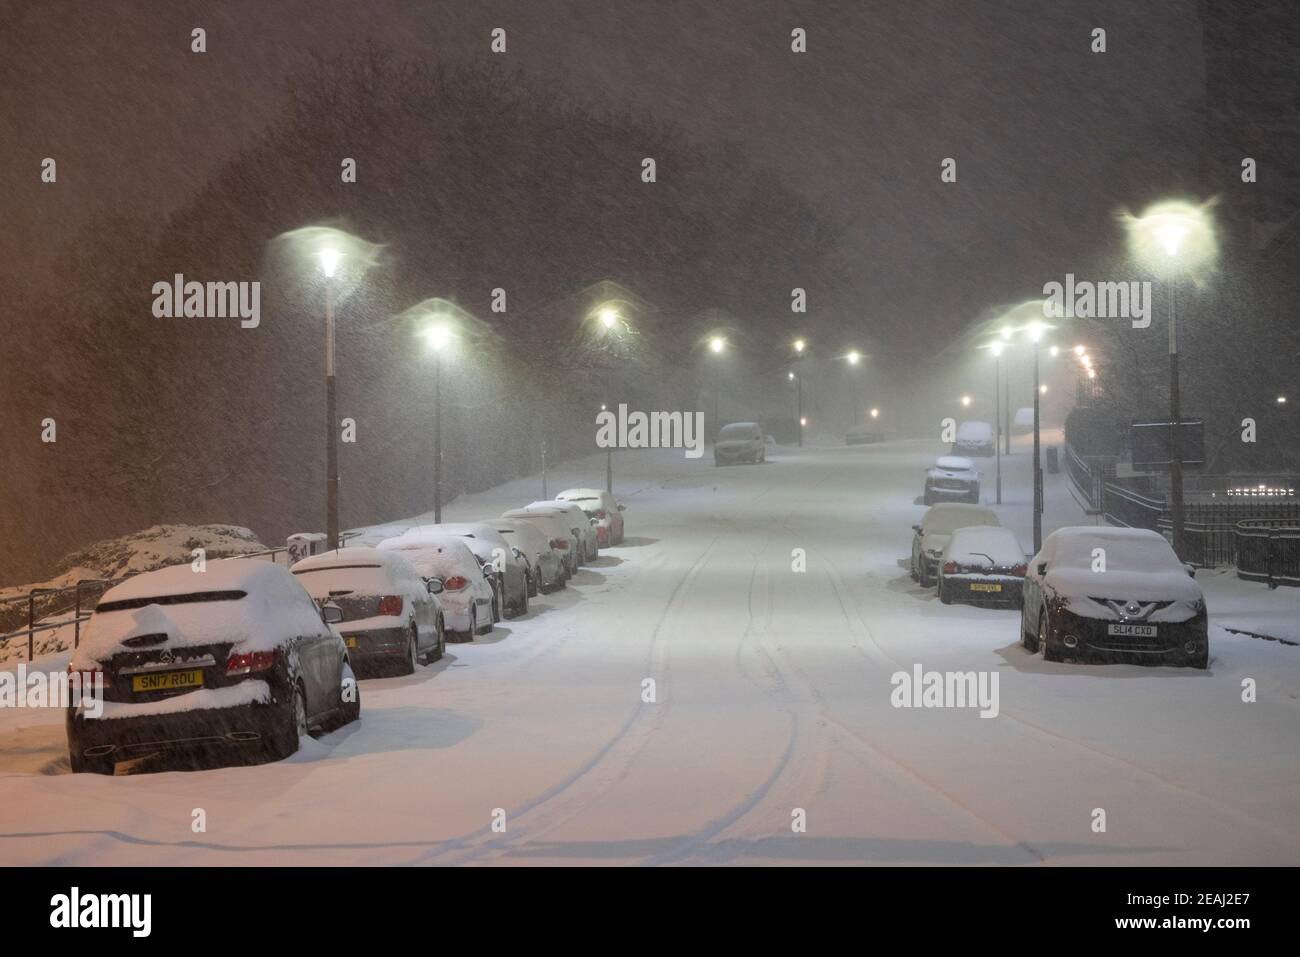 Edinburgh, Scotland, UK. 10 Feb 2021. Big freeze continues in the UK with heavy overnight and morning snow bringing traffic to a standstill on many roads in the city centre. Pic; Blenheim Place at 6qm was covered in thick snow.  Iain Masterton/Alamy Live news Stock Photo